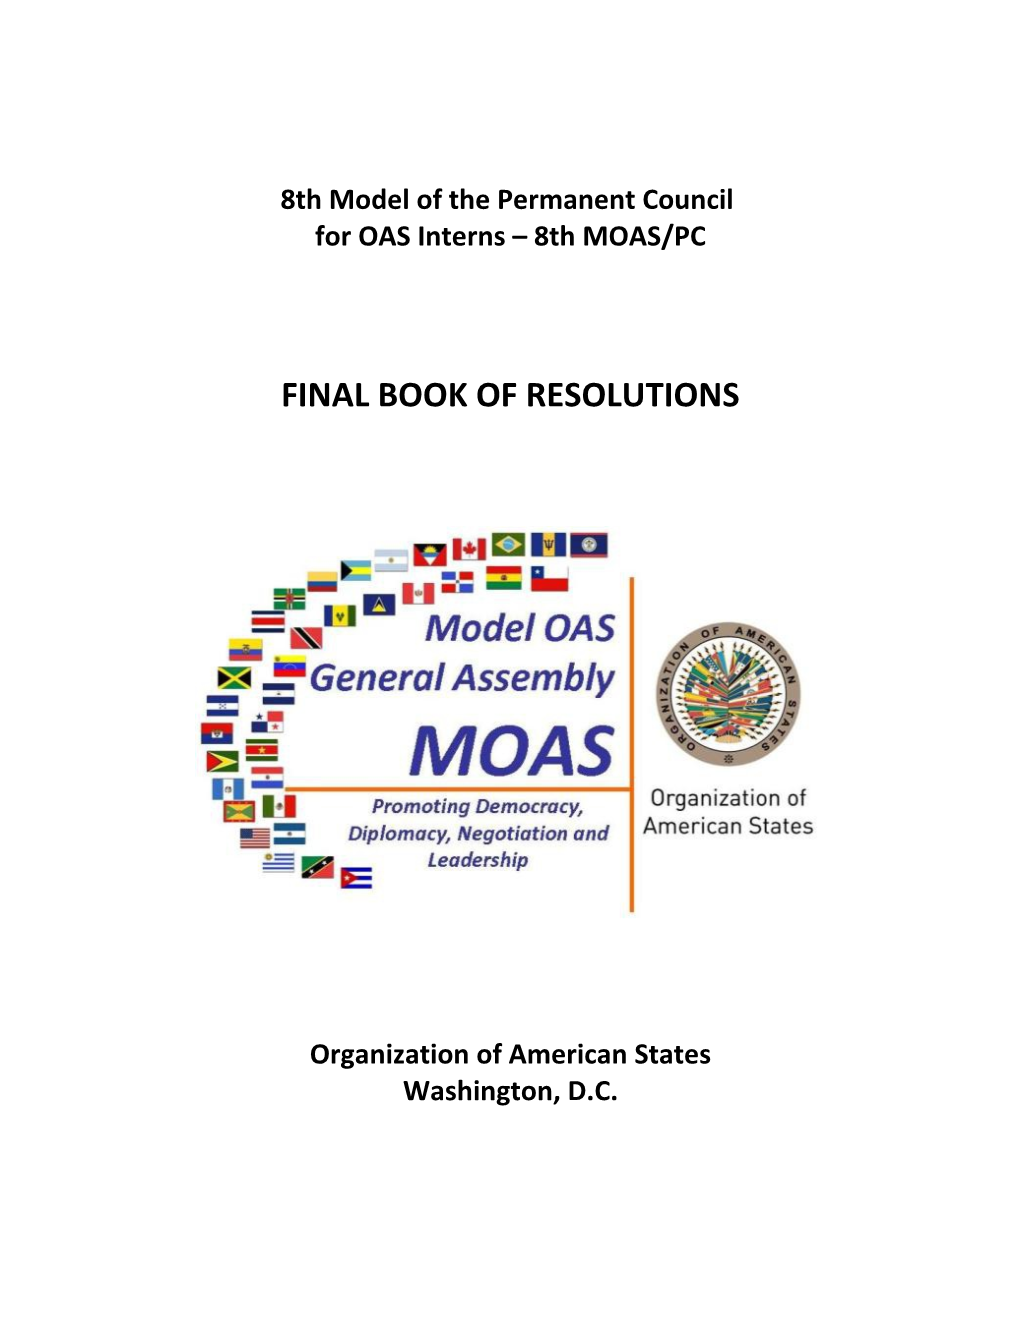 8Th MODEL of the PERMANENT COUNCIL for OAS INTERNS